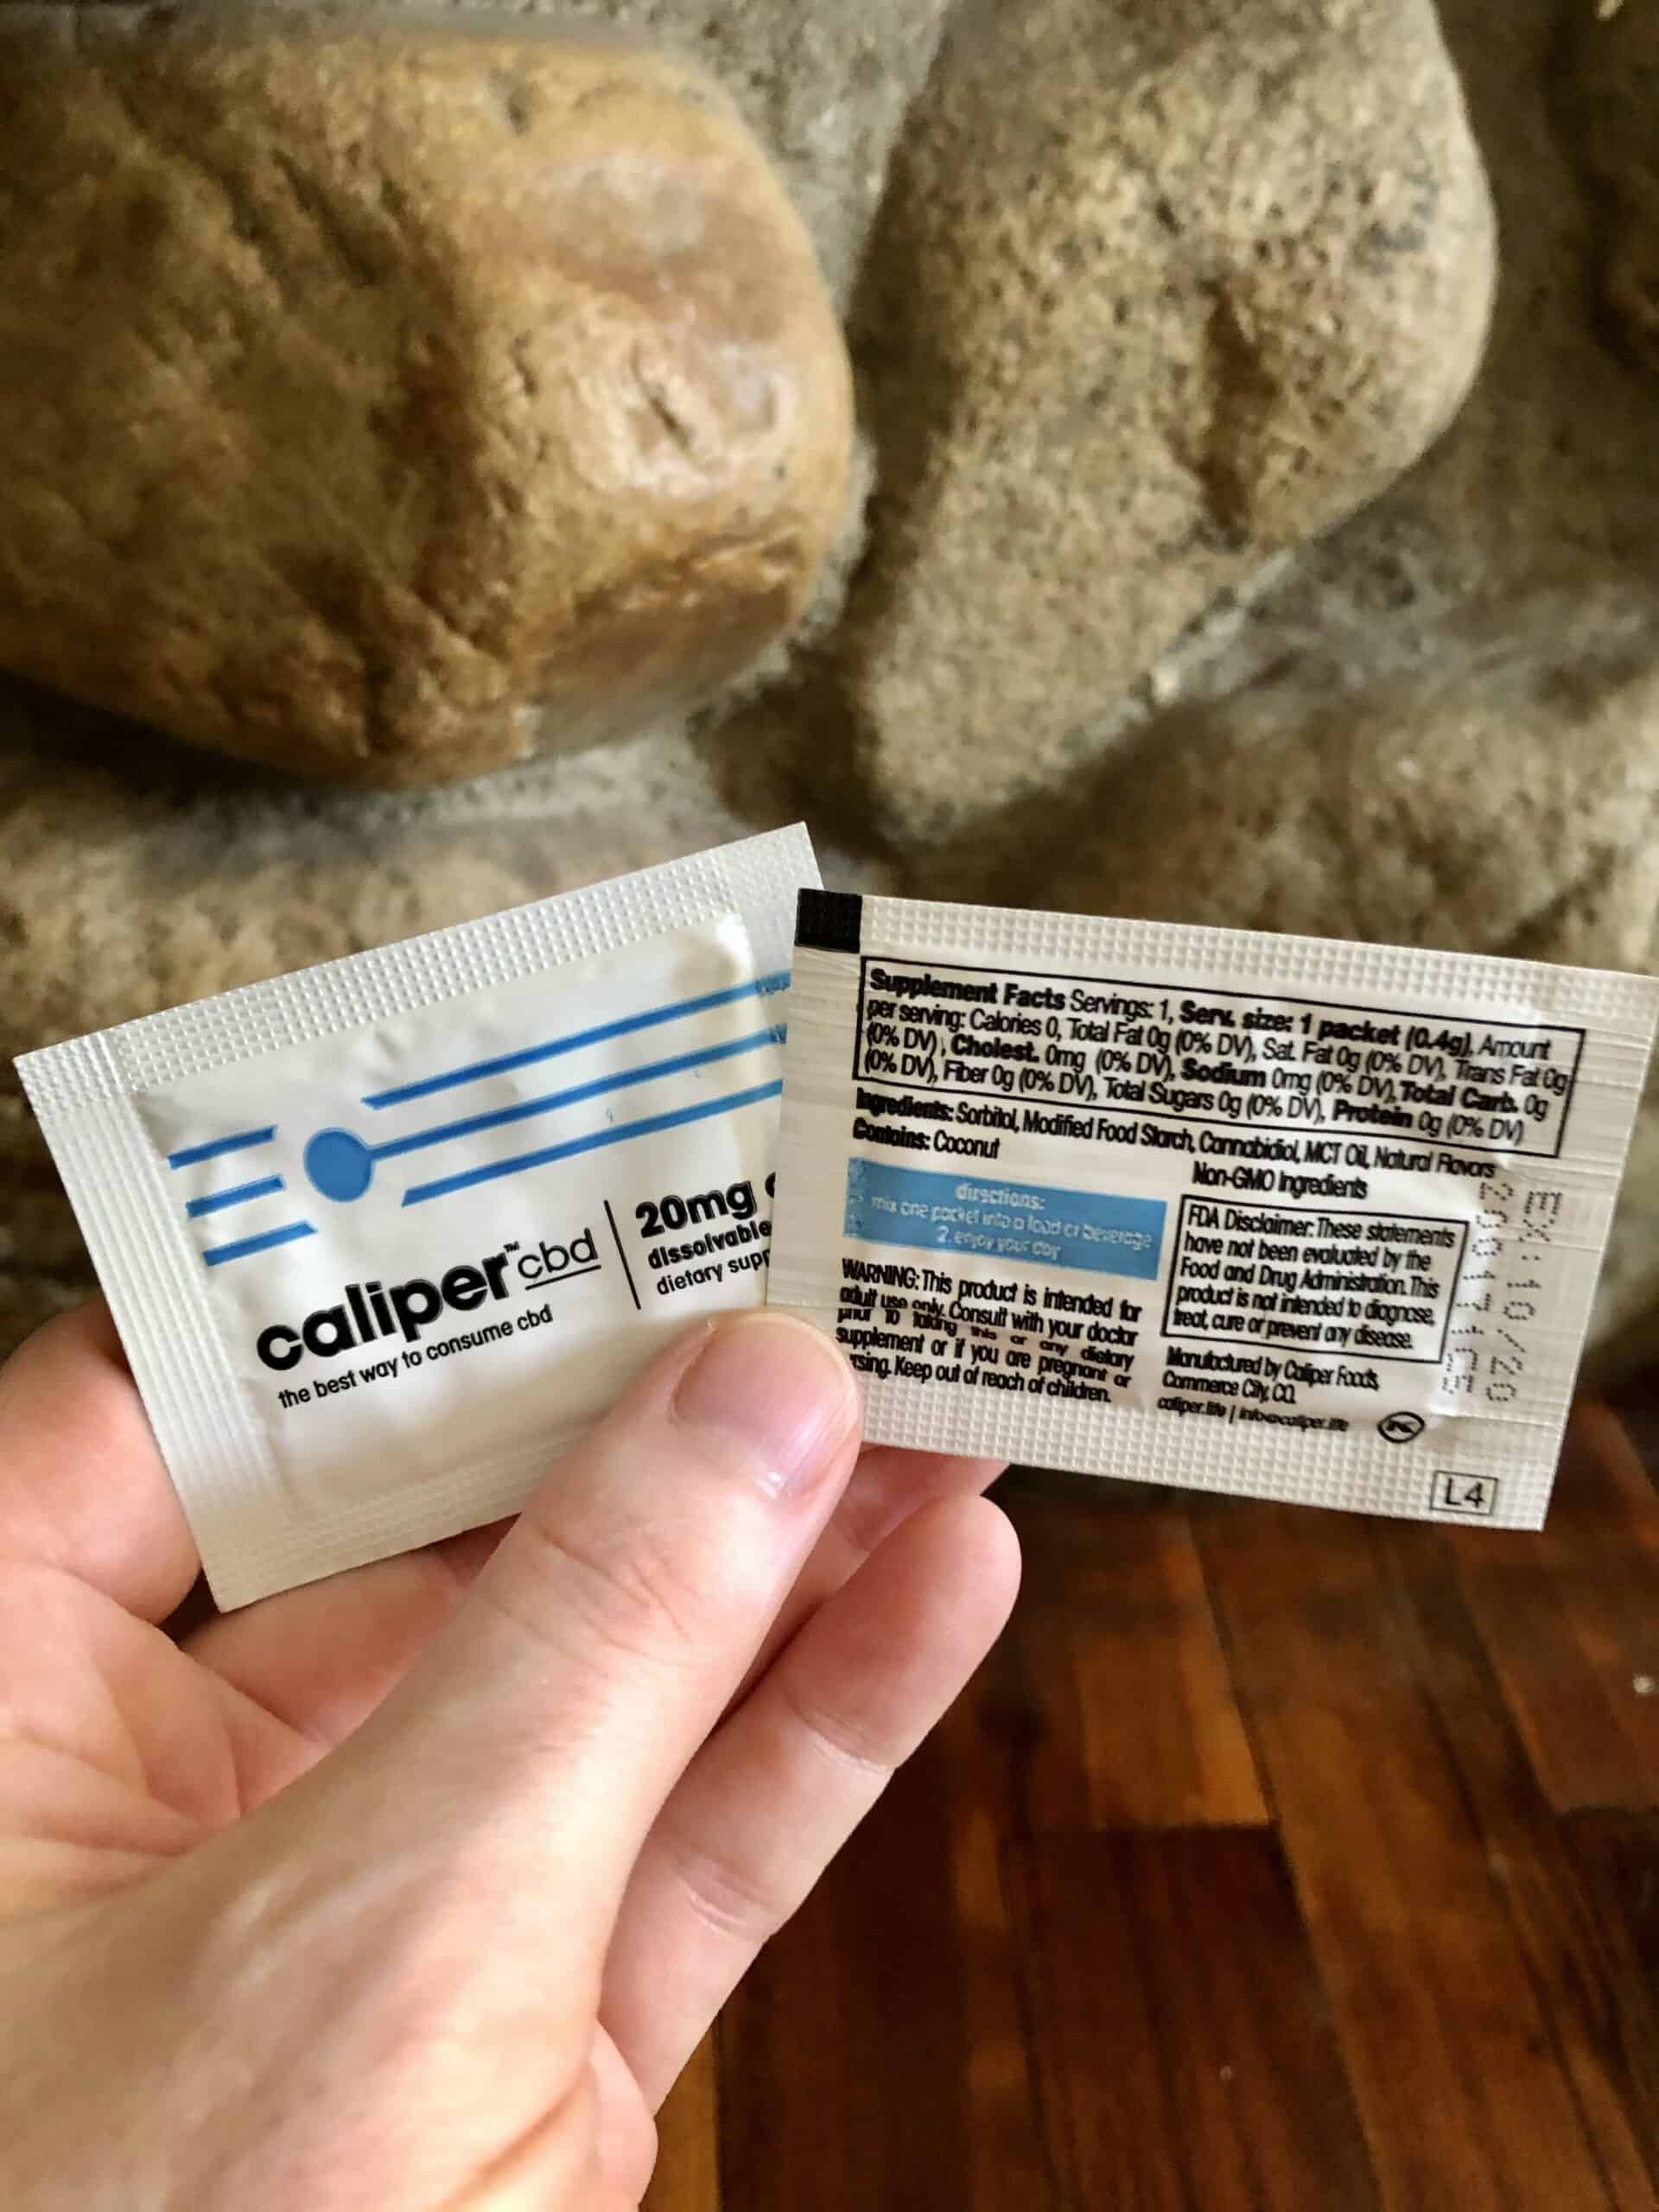 Caliper CBD Dissolvable Powder Save On Cannabis Review Specifications